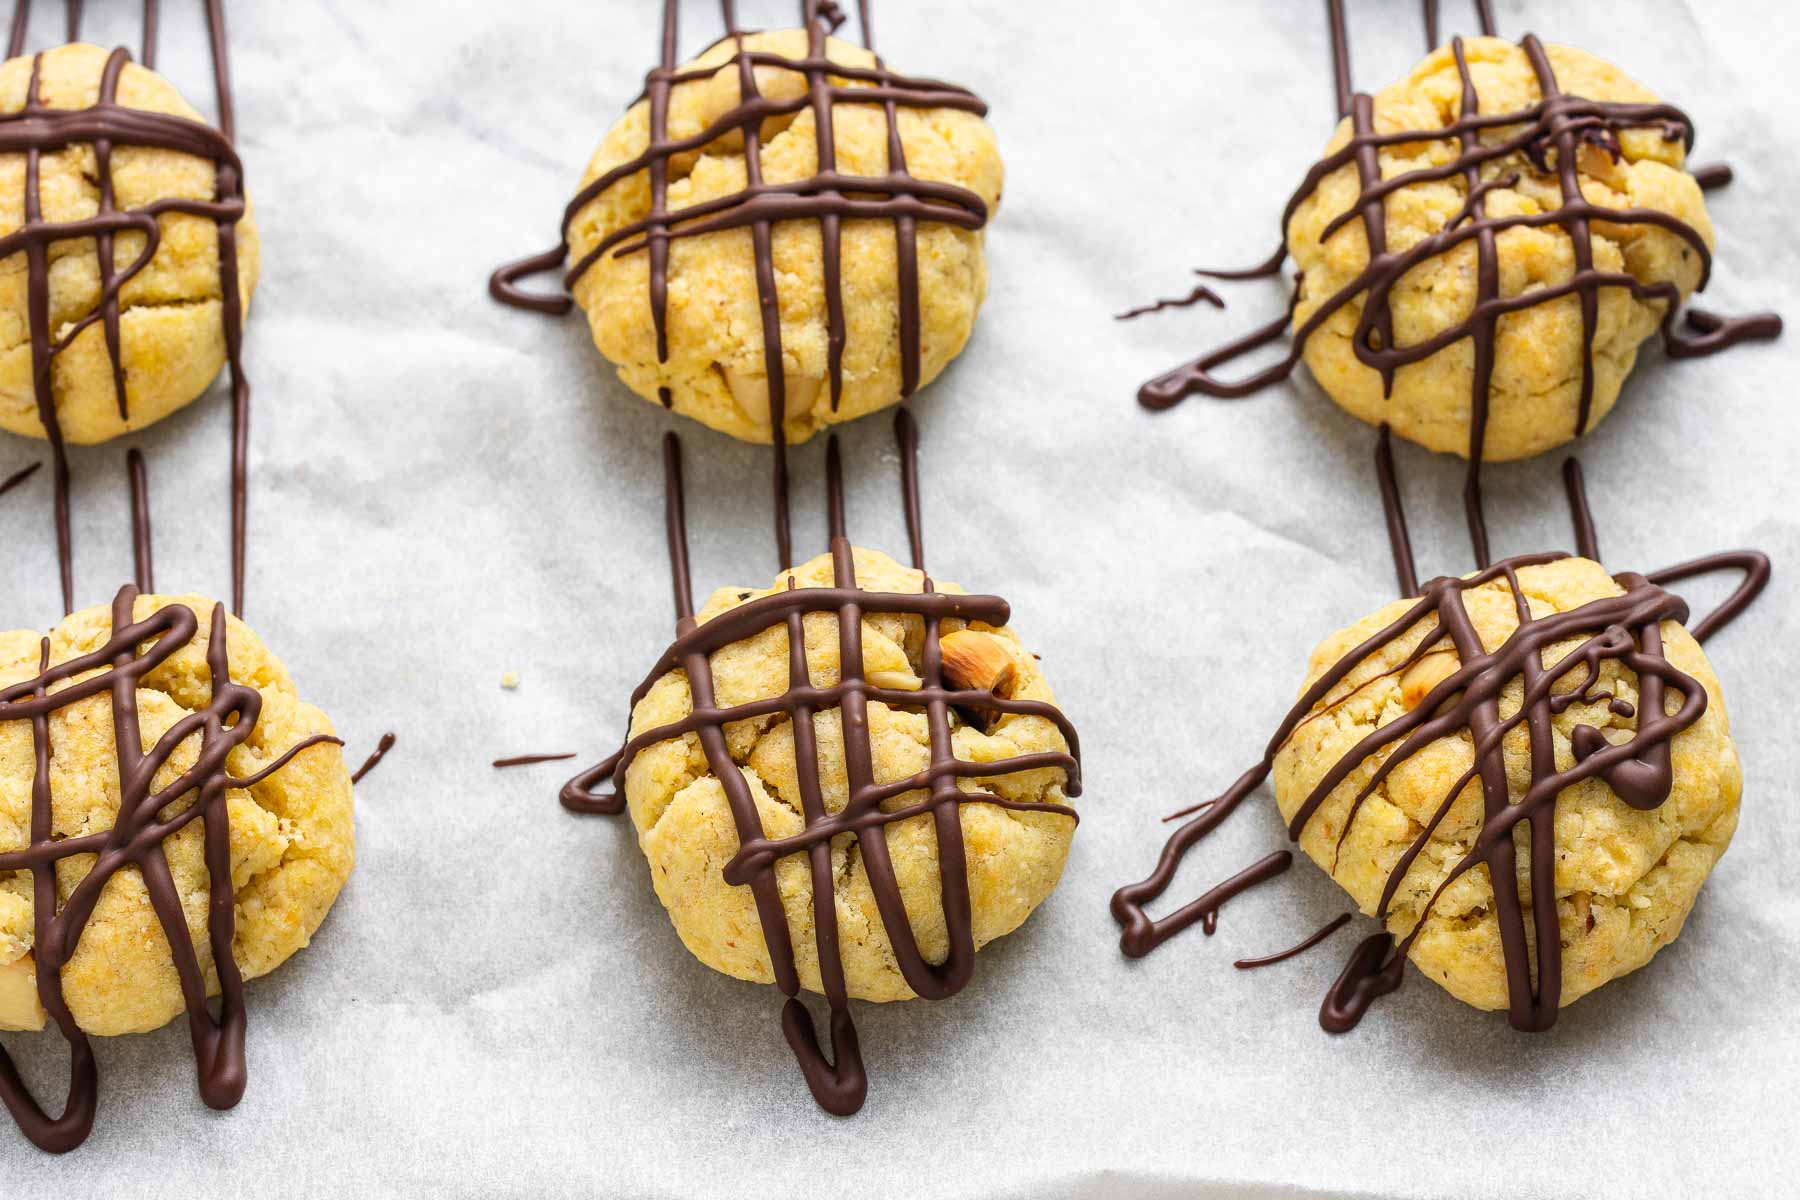 Six cookies criss-crossed with chocolate drizzle.